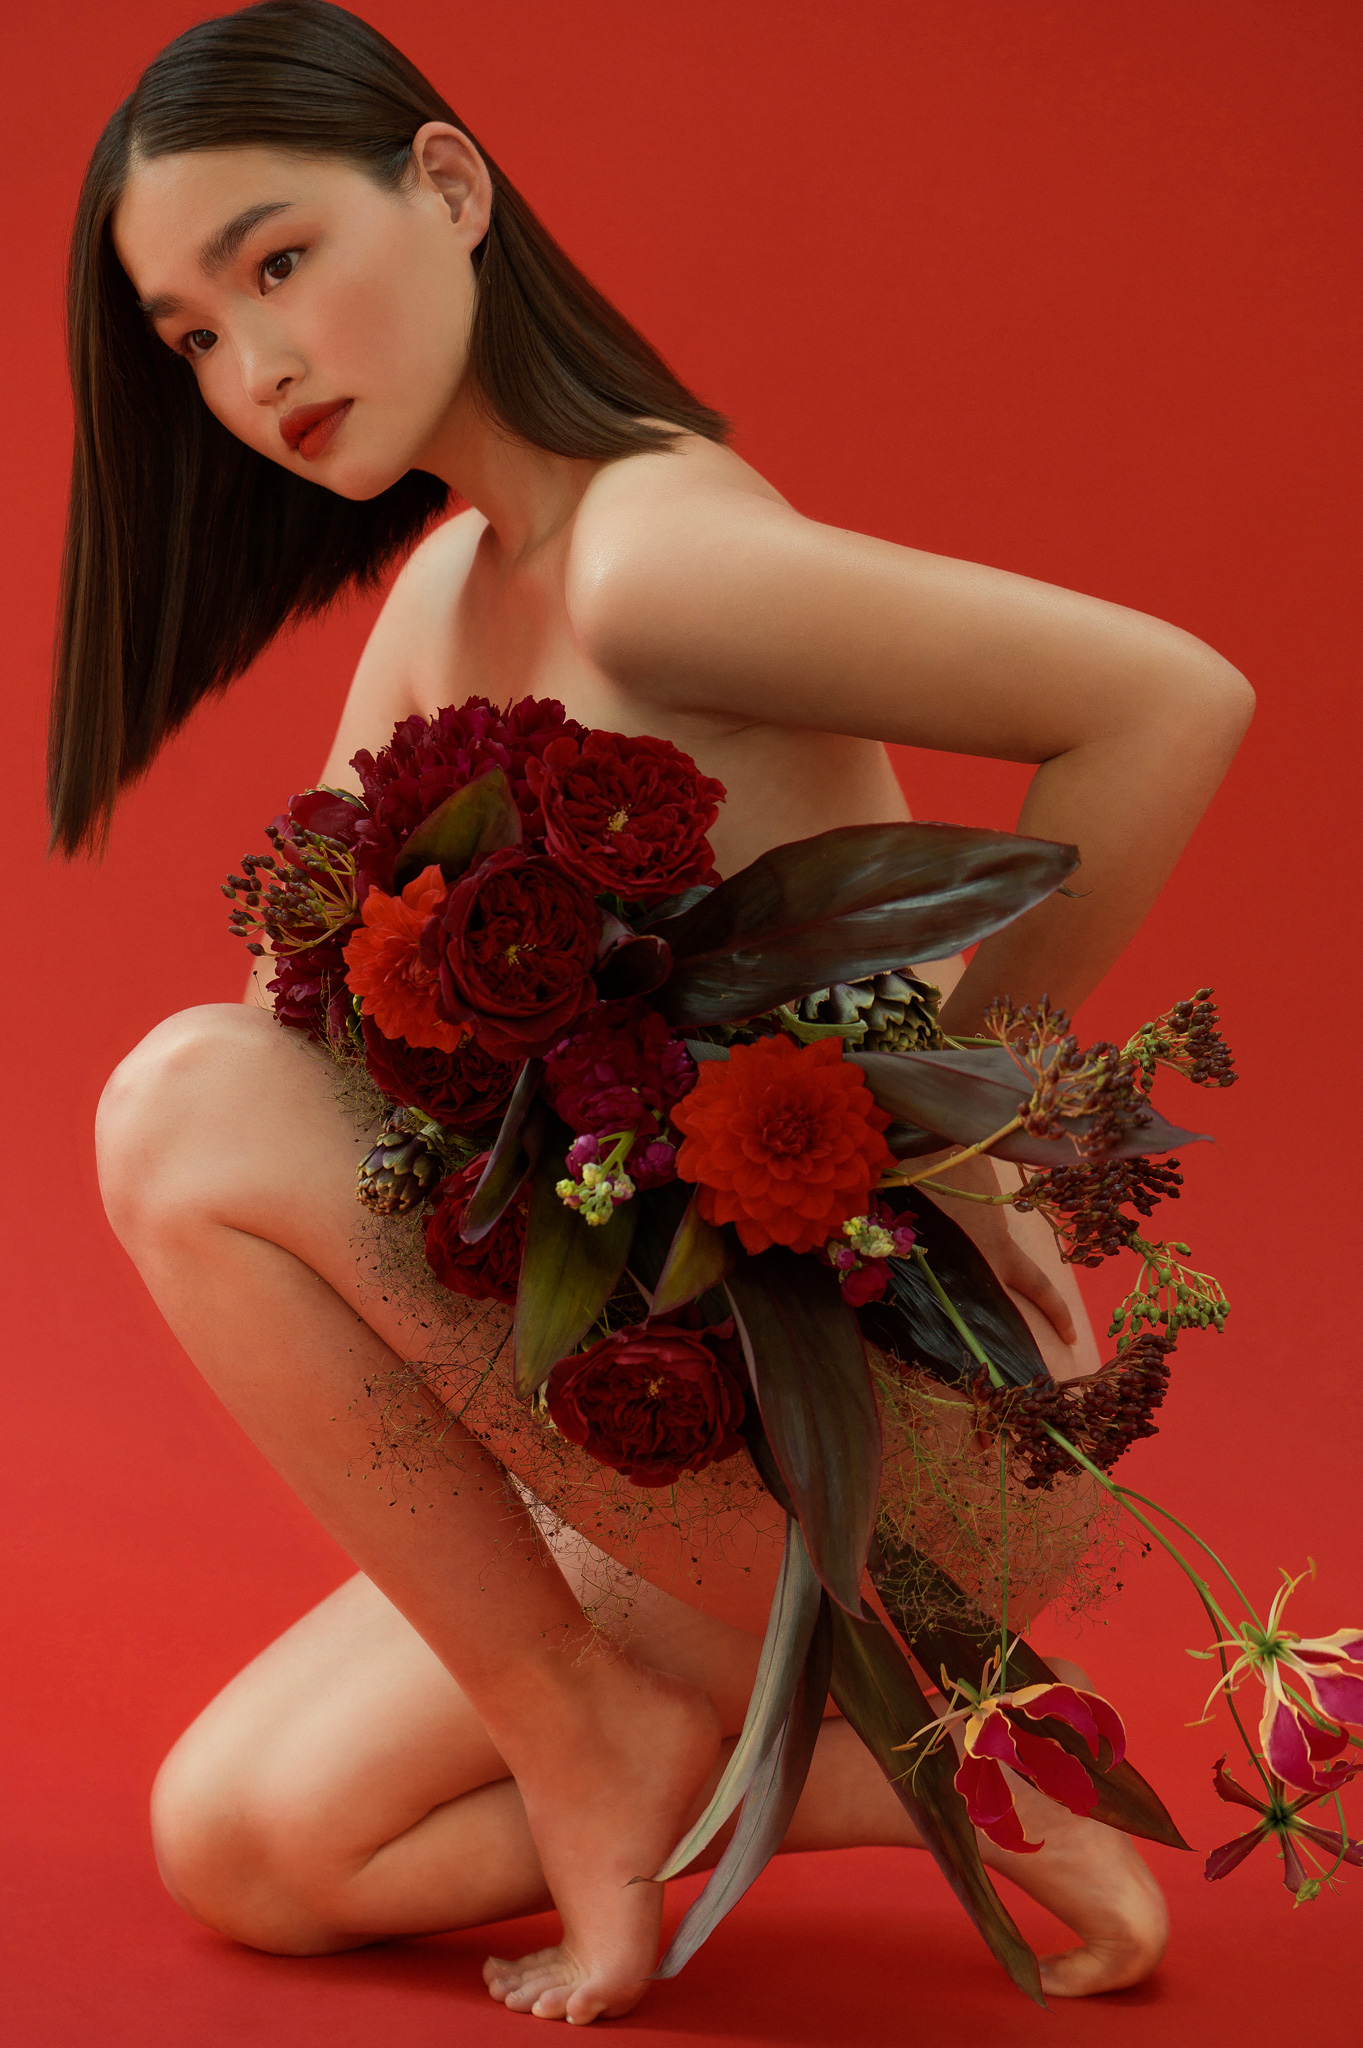 Flowers for justice and equality - Katya Hutter - blogger on thursd - asian model and bouquet